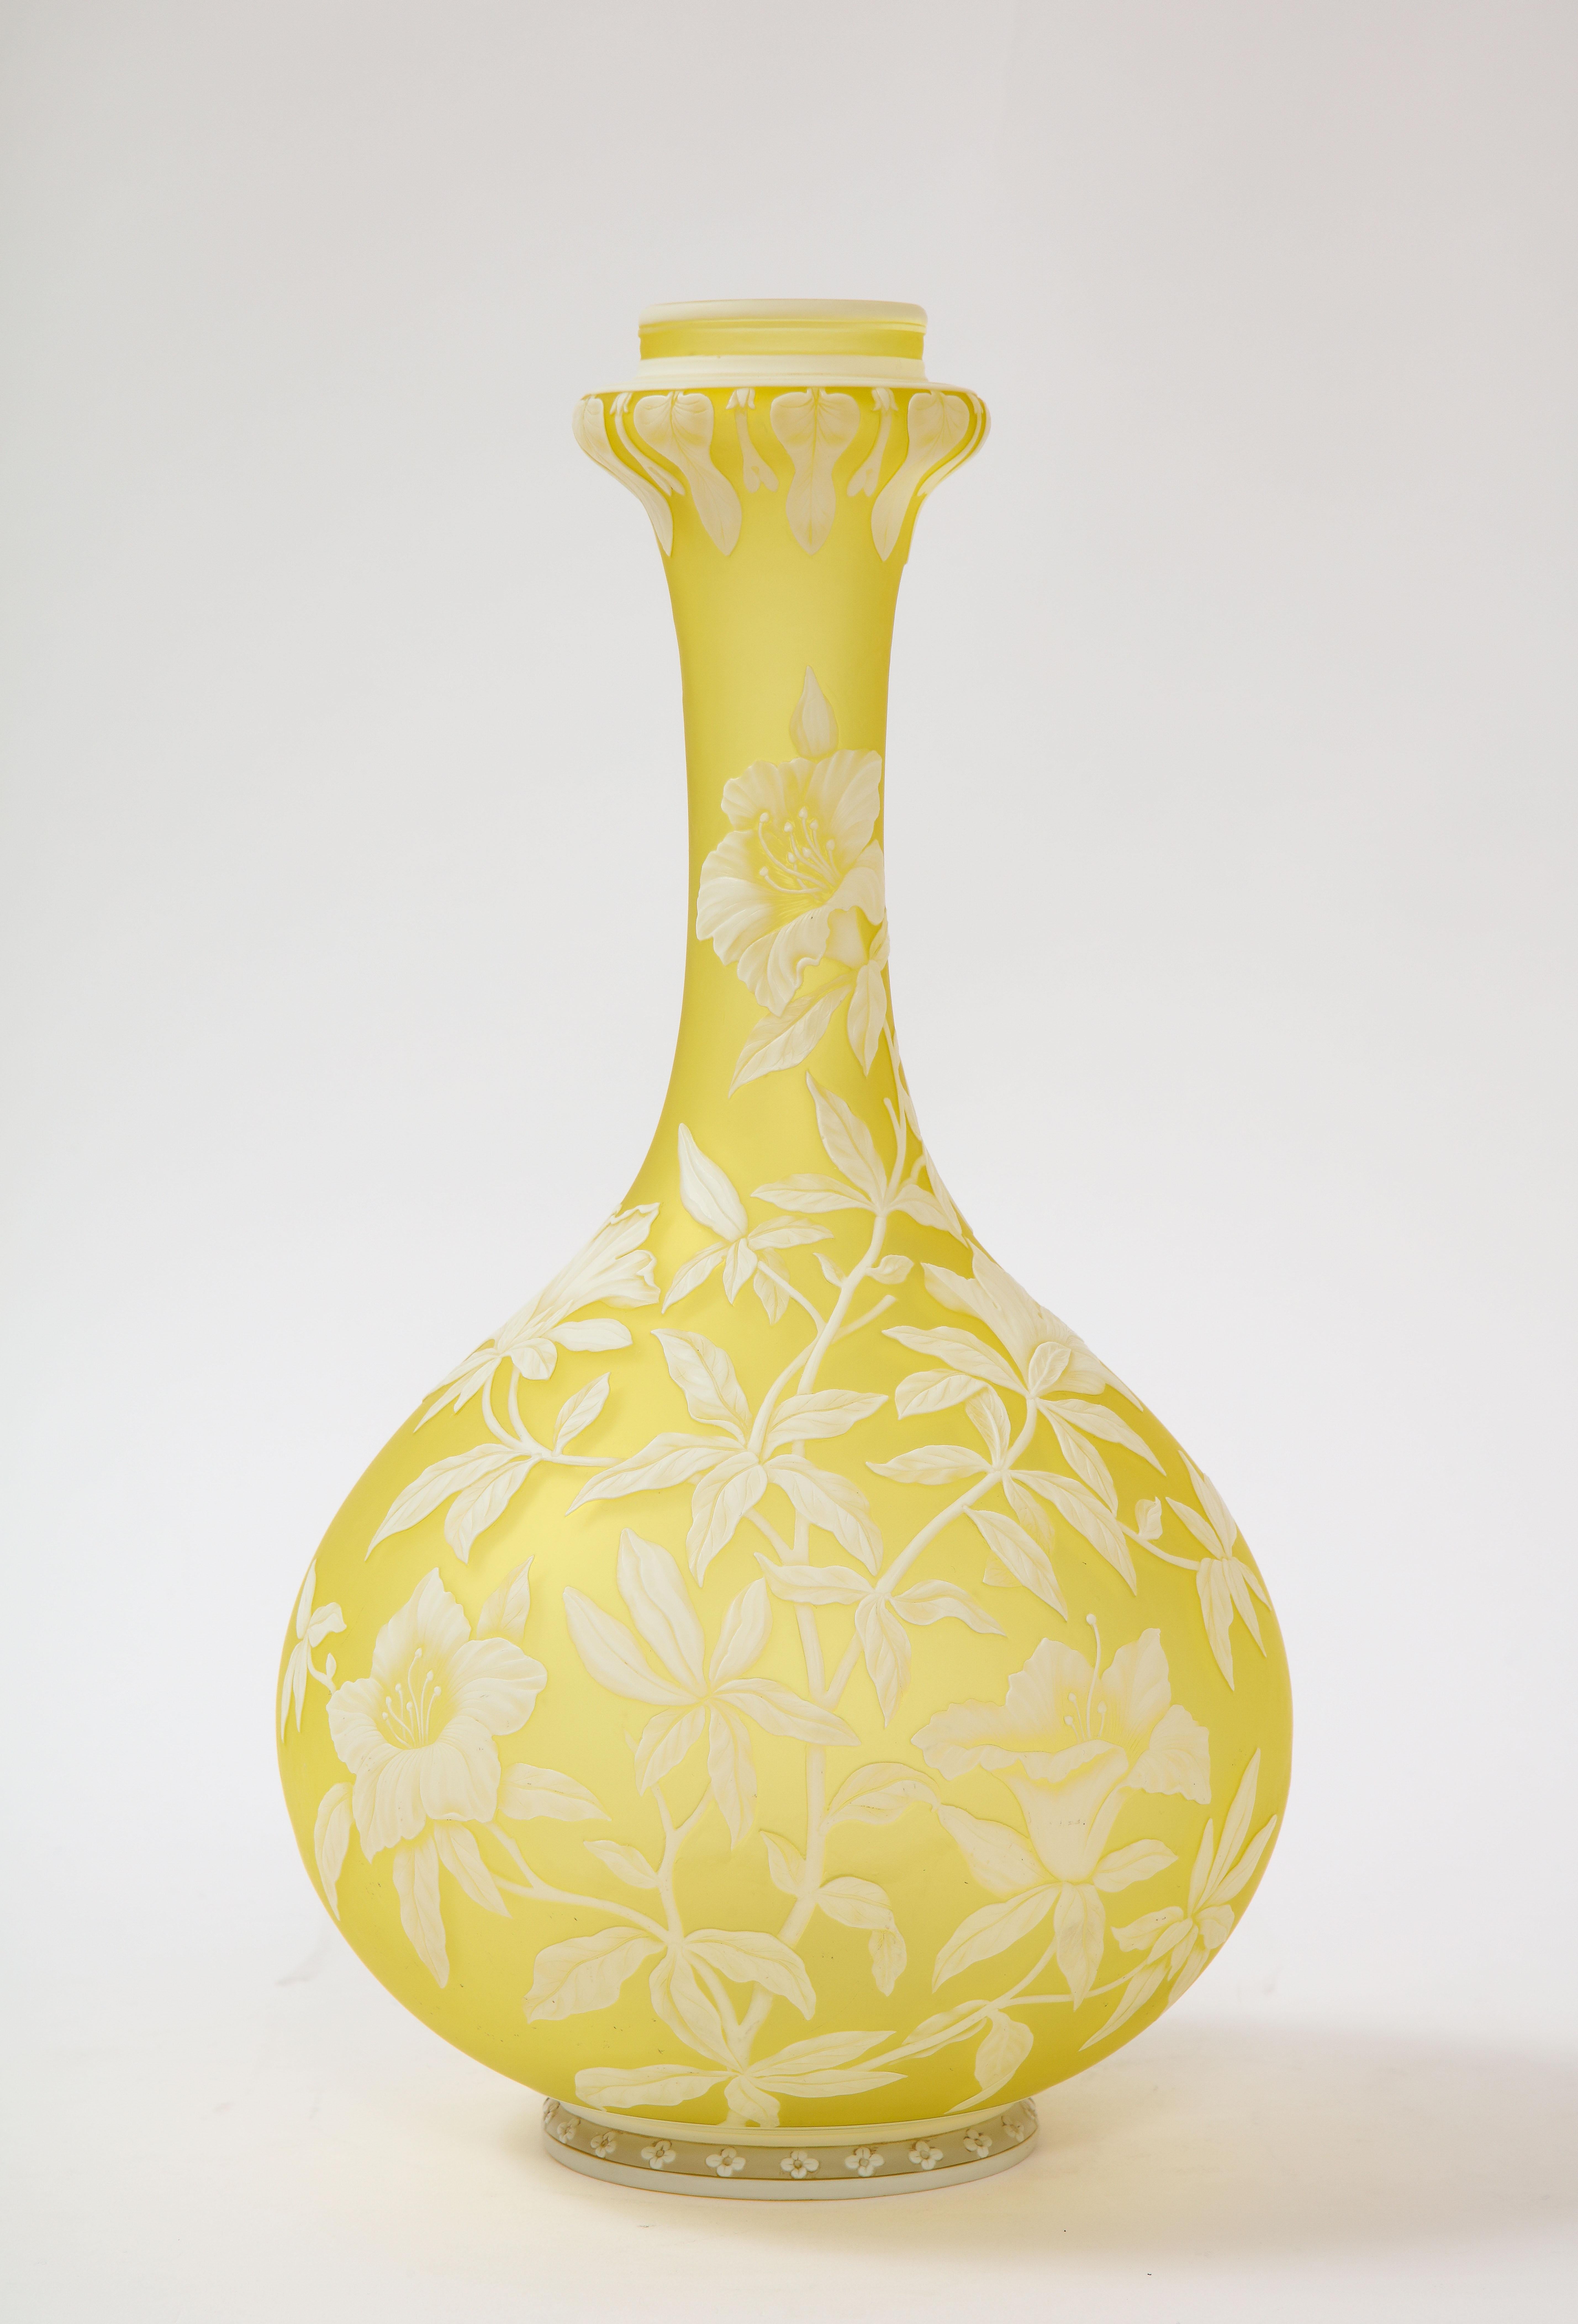 An incredible quality Thomas Webb & Sons cameo double overlaid white over yellow etched and acid washed vase. This particular vase is of a yellow ground with white overlaid flowers, leaves, and vines hand carved into it. The entire vase is